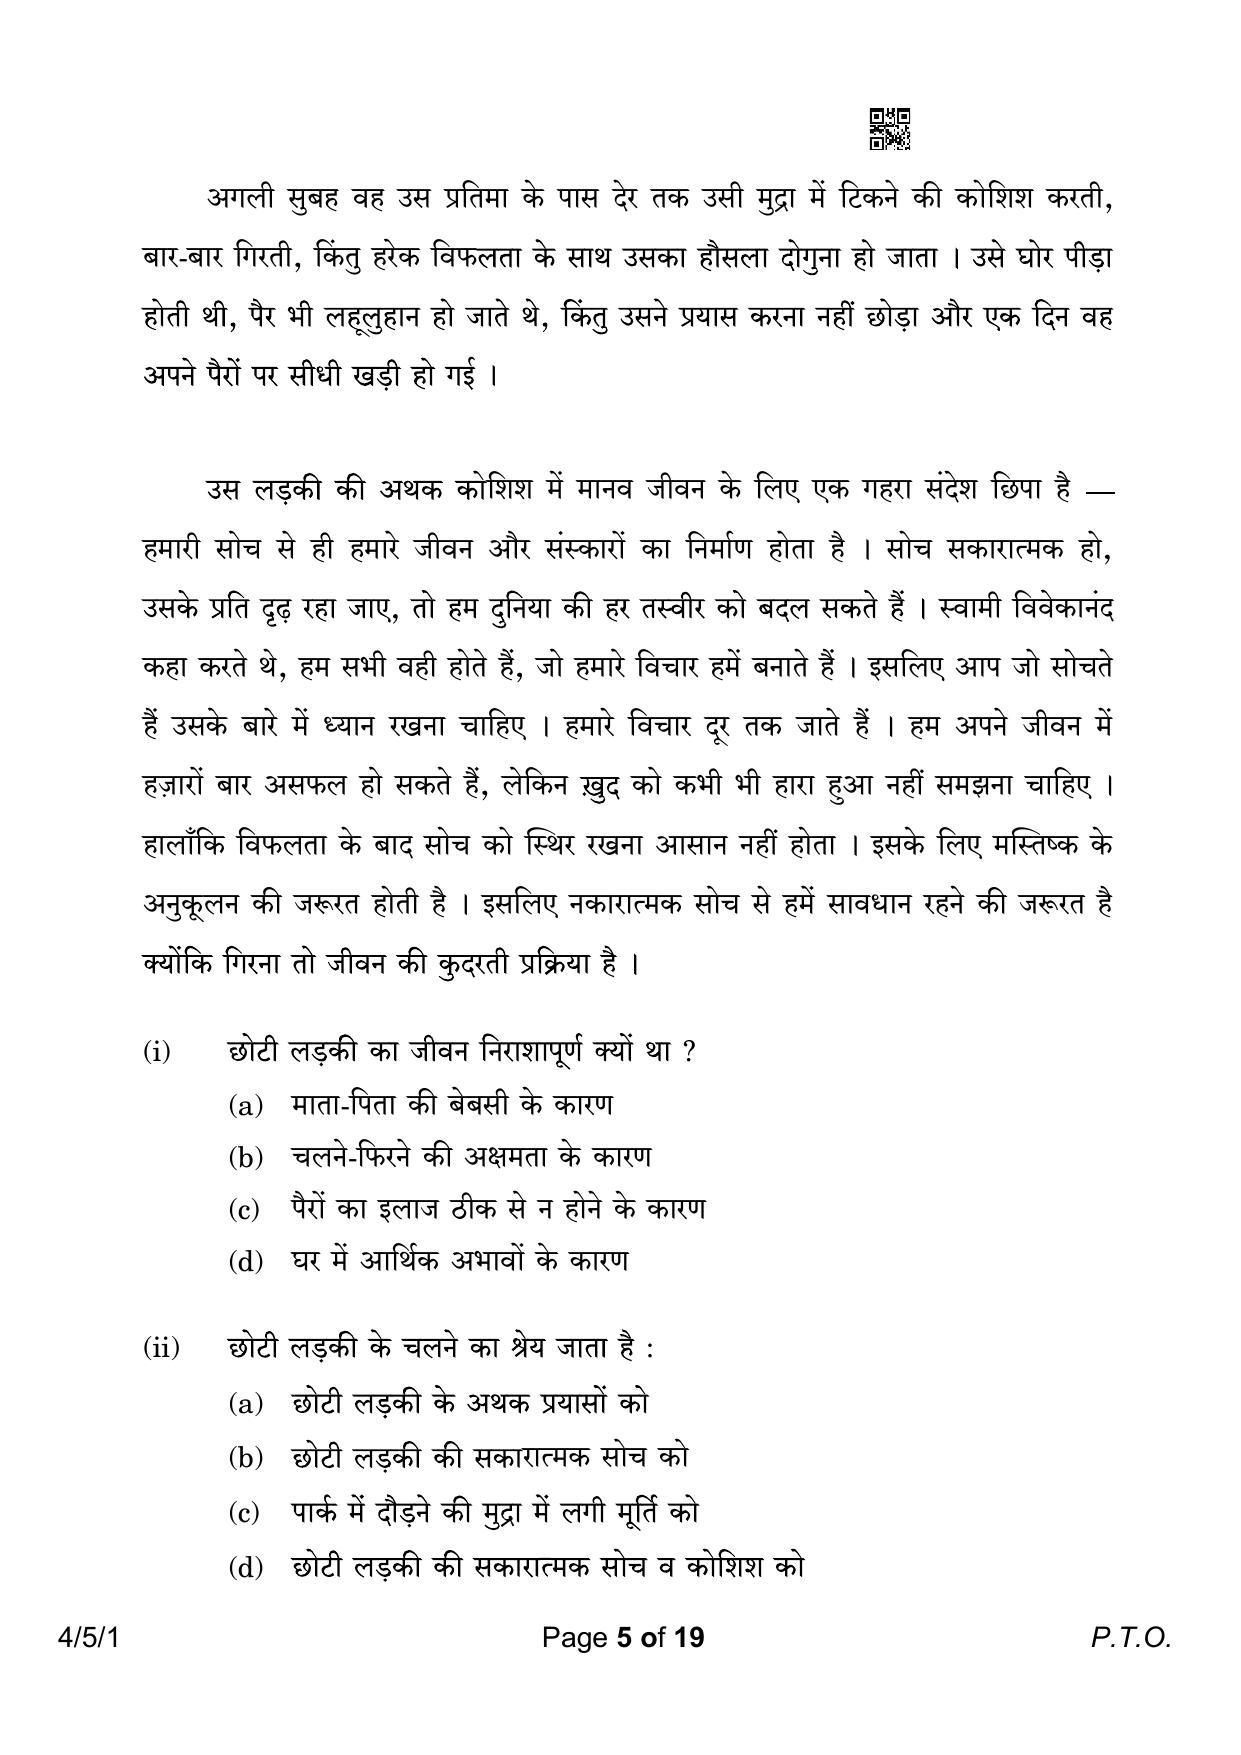 CBSE Class 10 4-5-1 Hindi B 2023 Question Paper - Page 5